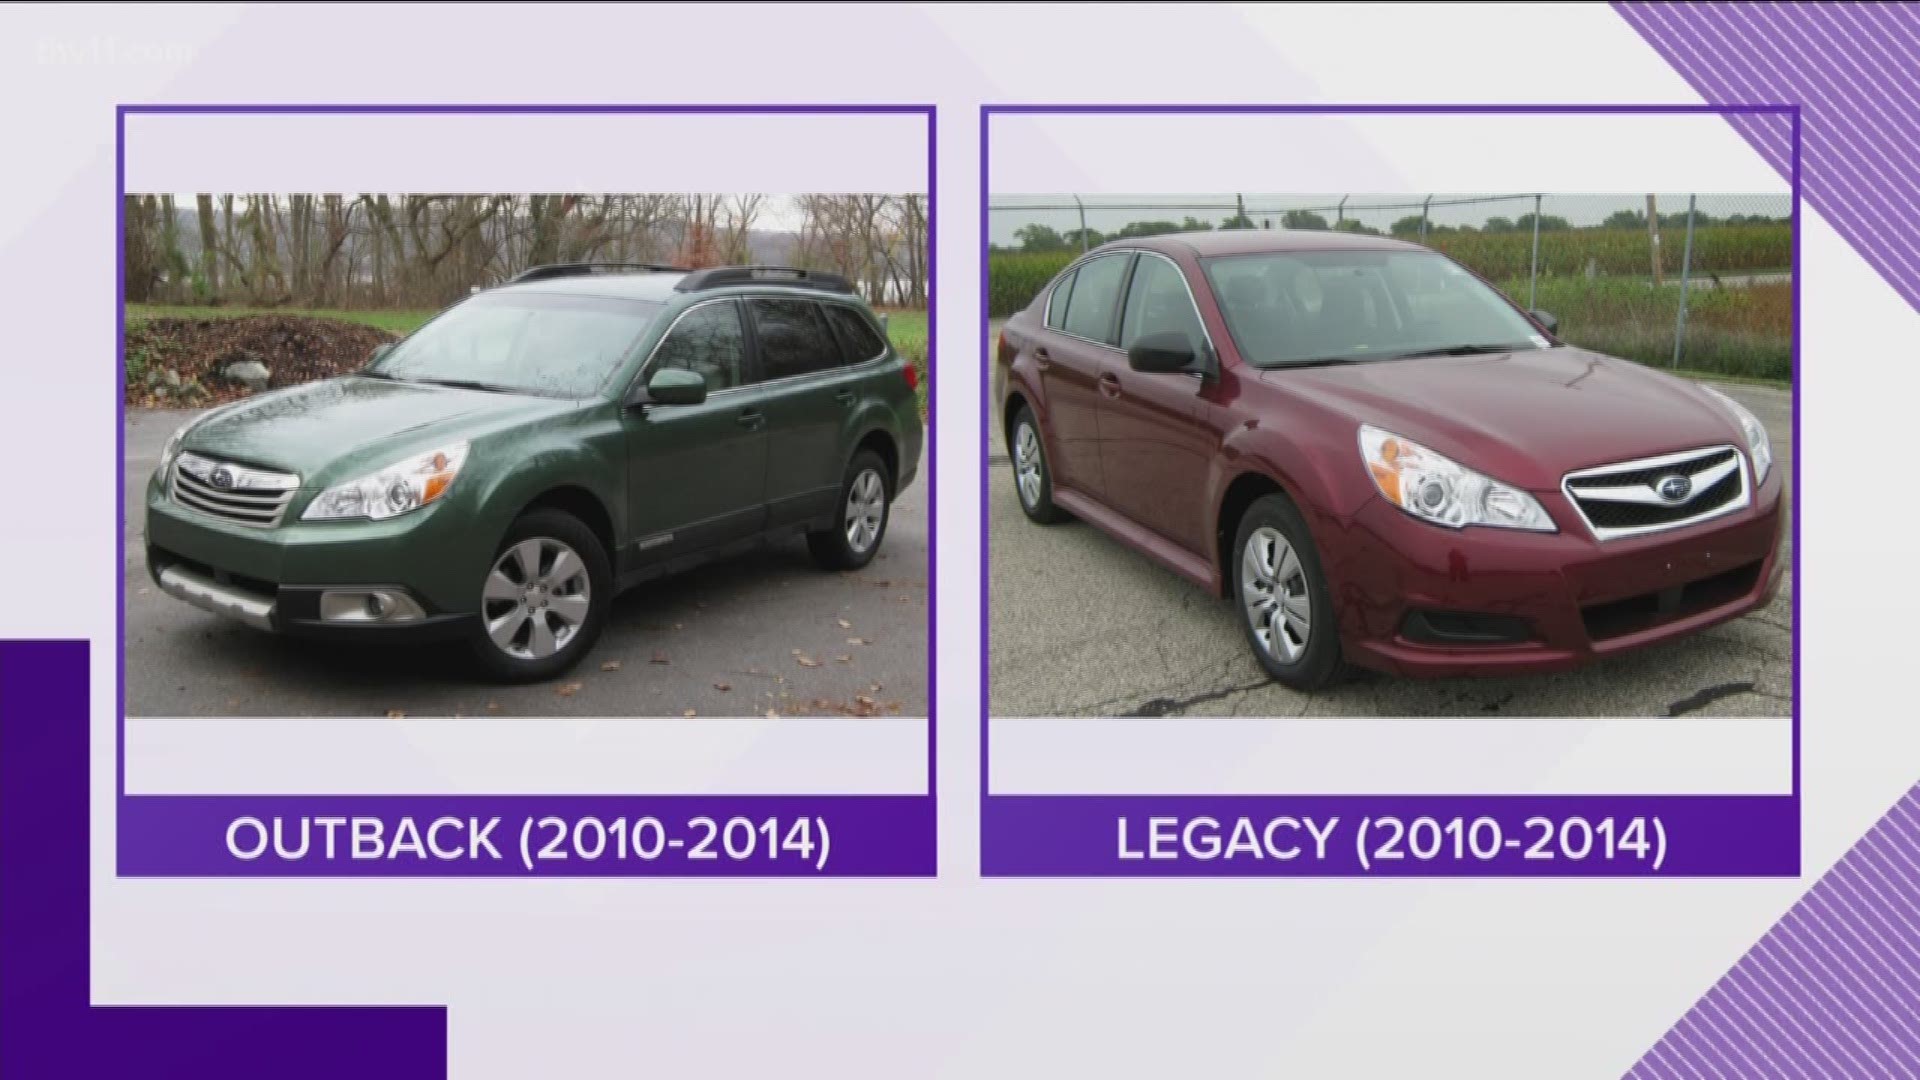 Carmaker Subaru is recalling more than 27,000 Outback SUVs and Legacy sedans.